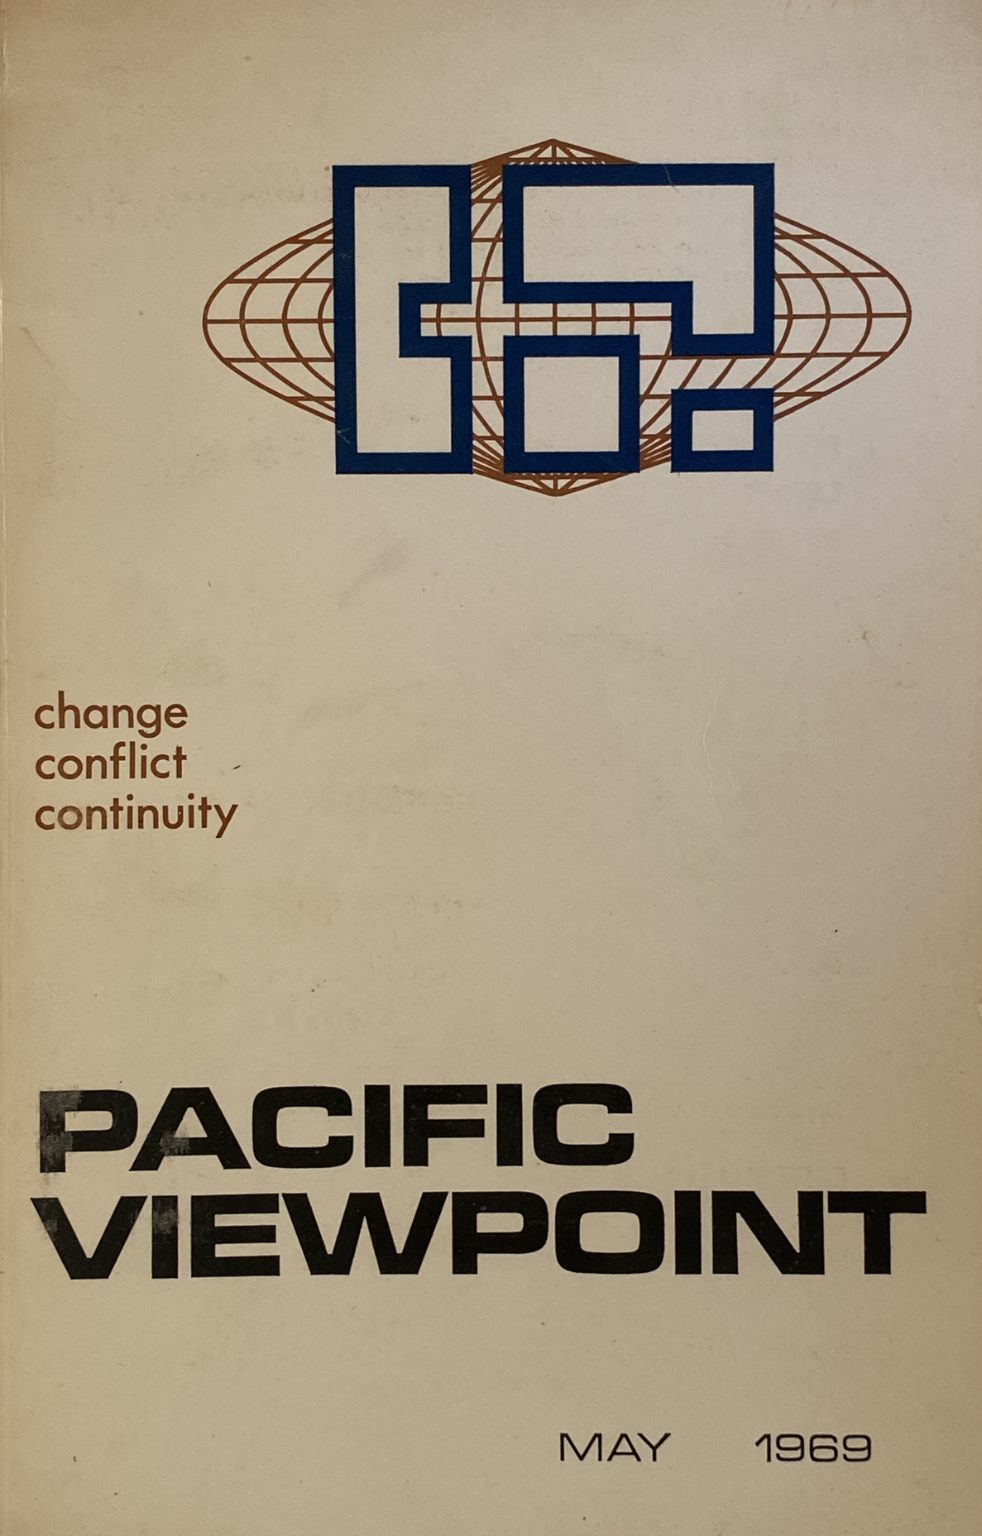 PACIFIC VIEWPOINT: Change - Conflict - Continuity, Vol 10, Number 1. - May 1969